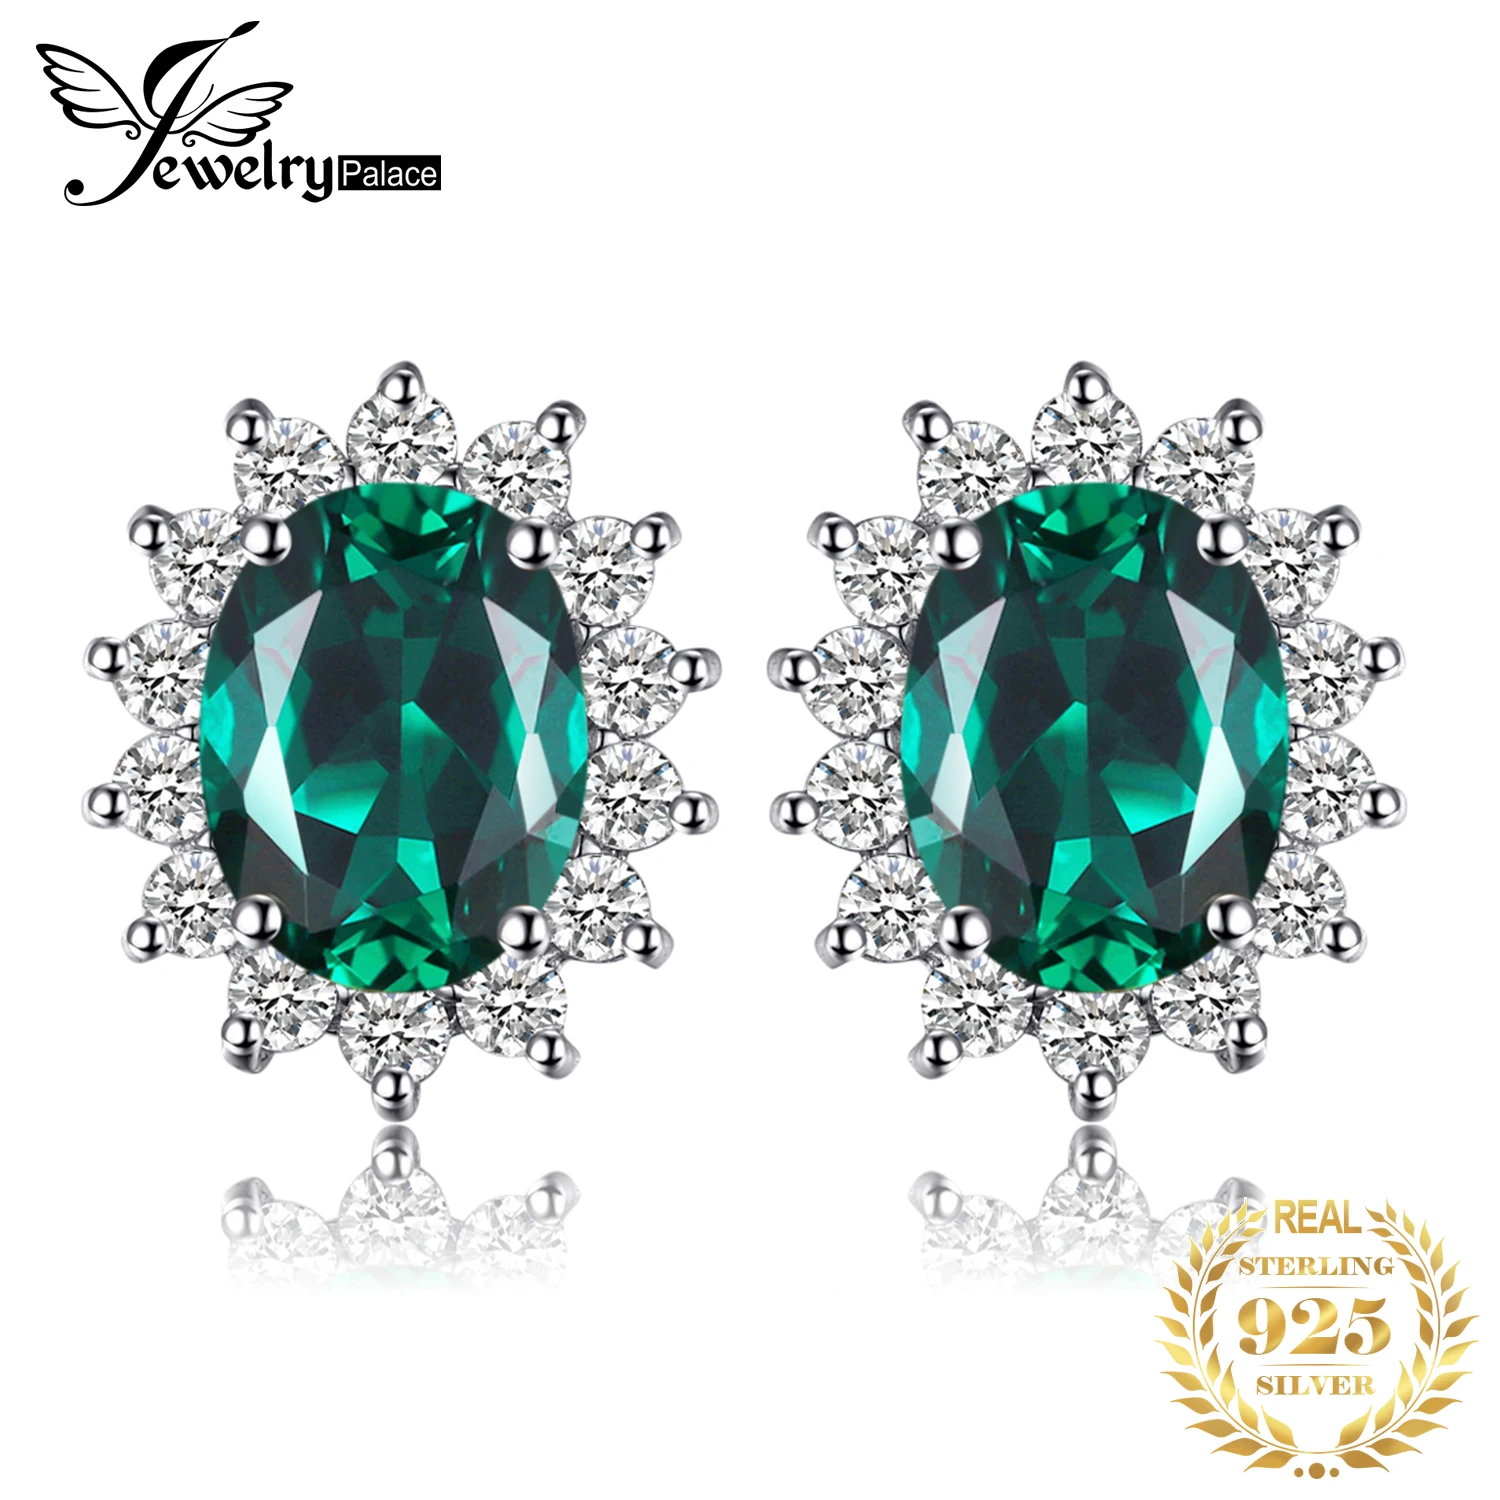 

JewelryPalace Kate Middleton Simulated Green Emerald 925 Sterling Silver Stud Earrings Princess Diana Gemstone Crown Earring